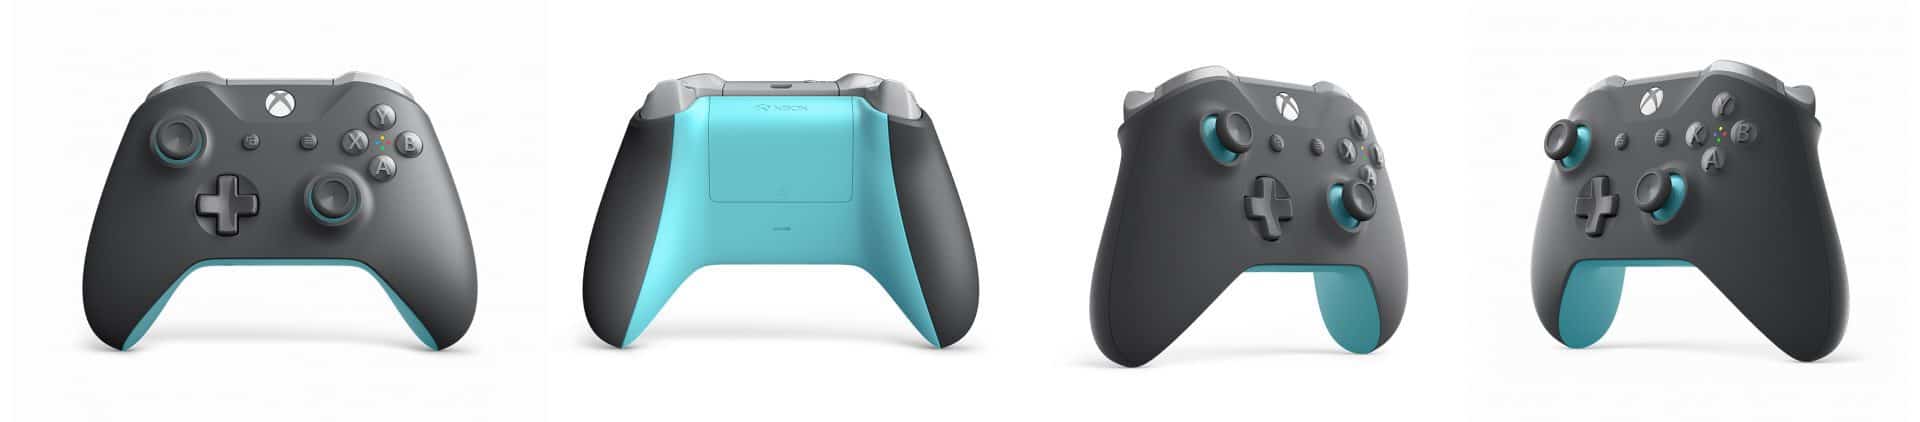 xbox one blue and grey controller